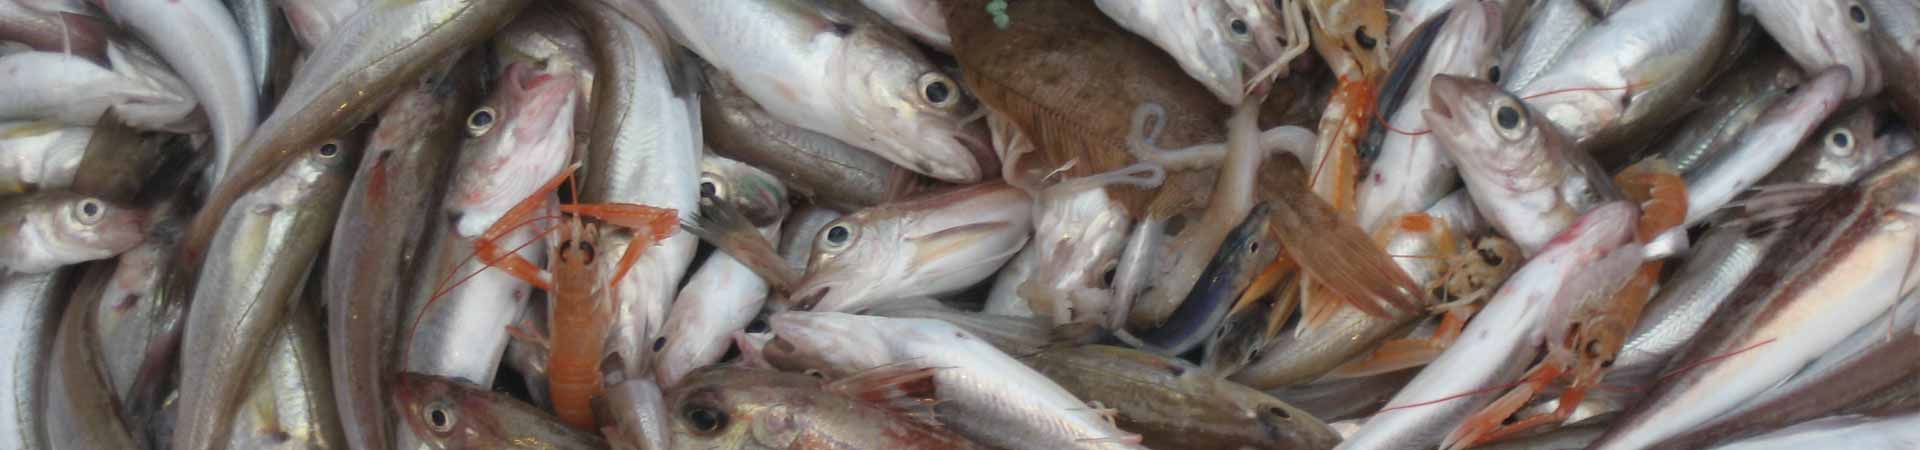 A mixed trawl catch in the Irish Sea with white fish, flatfish, crustaceans and cephalopods